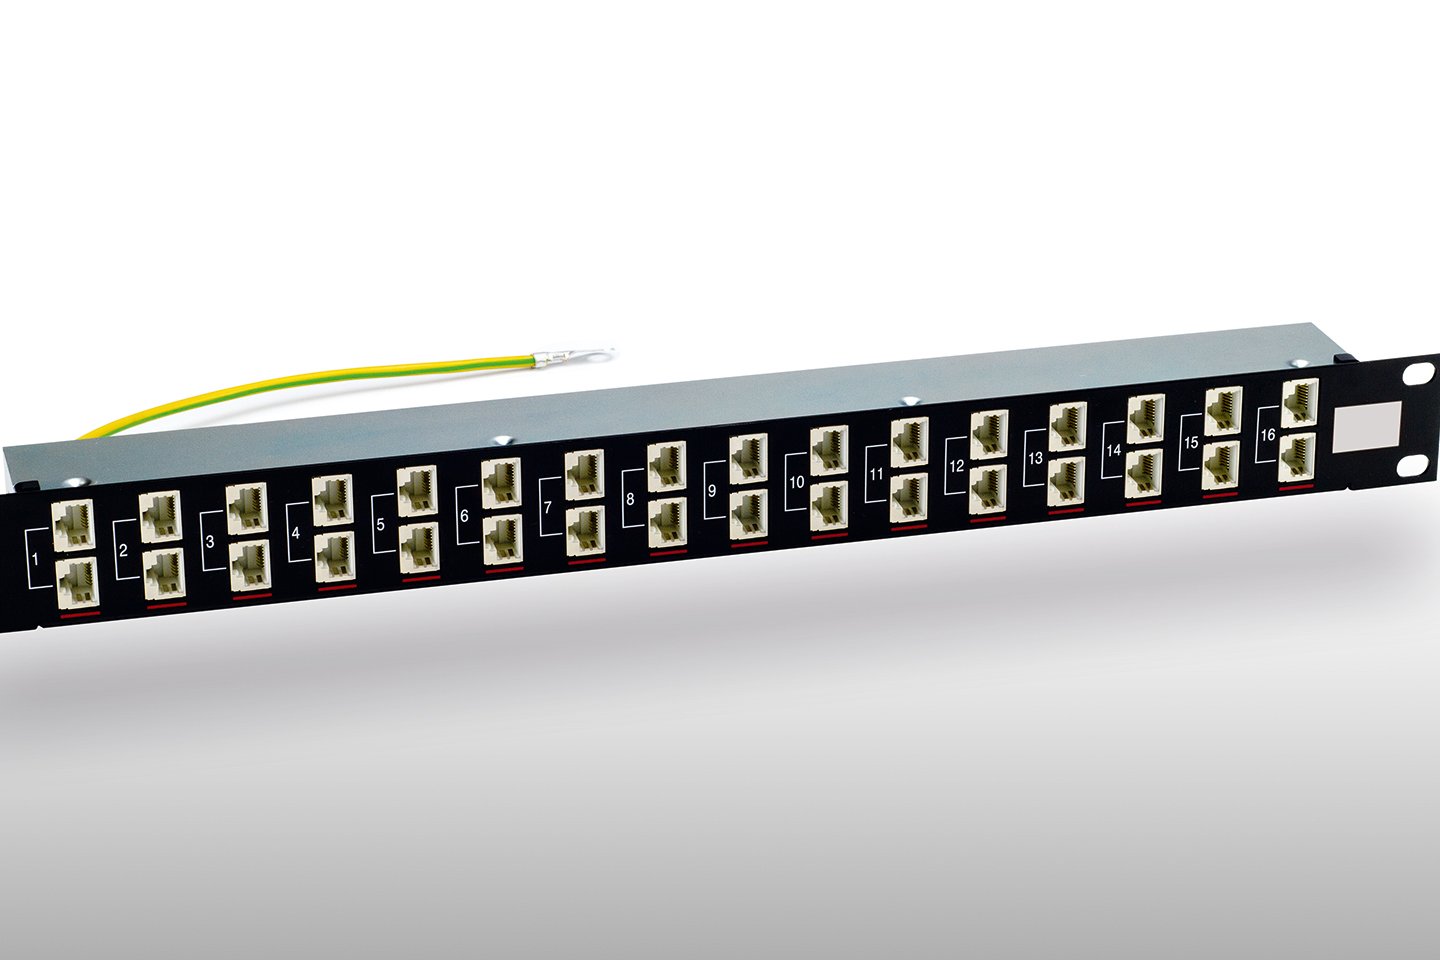 Cross Connect Panel with RJ45 modules